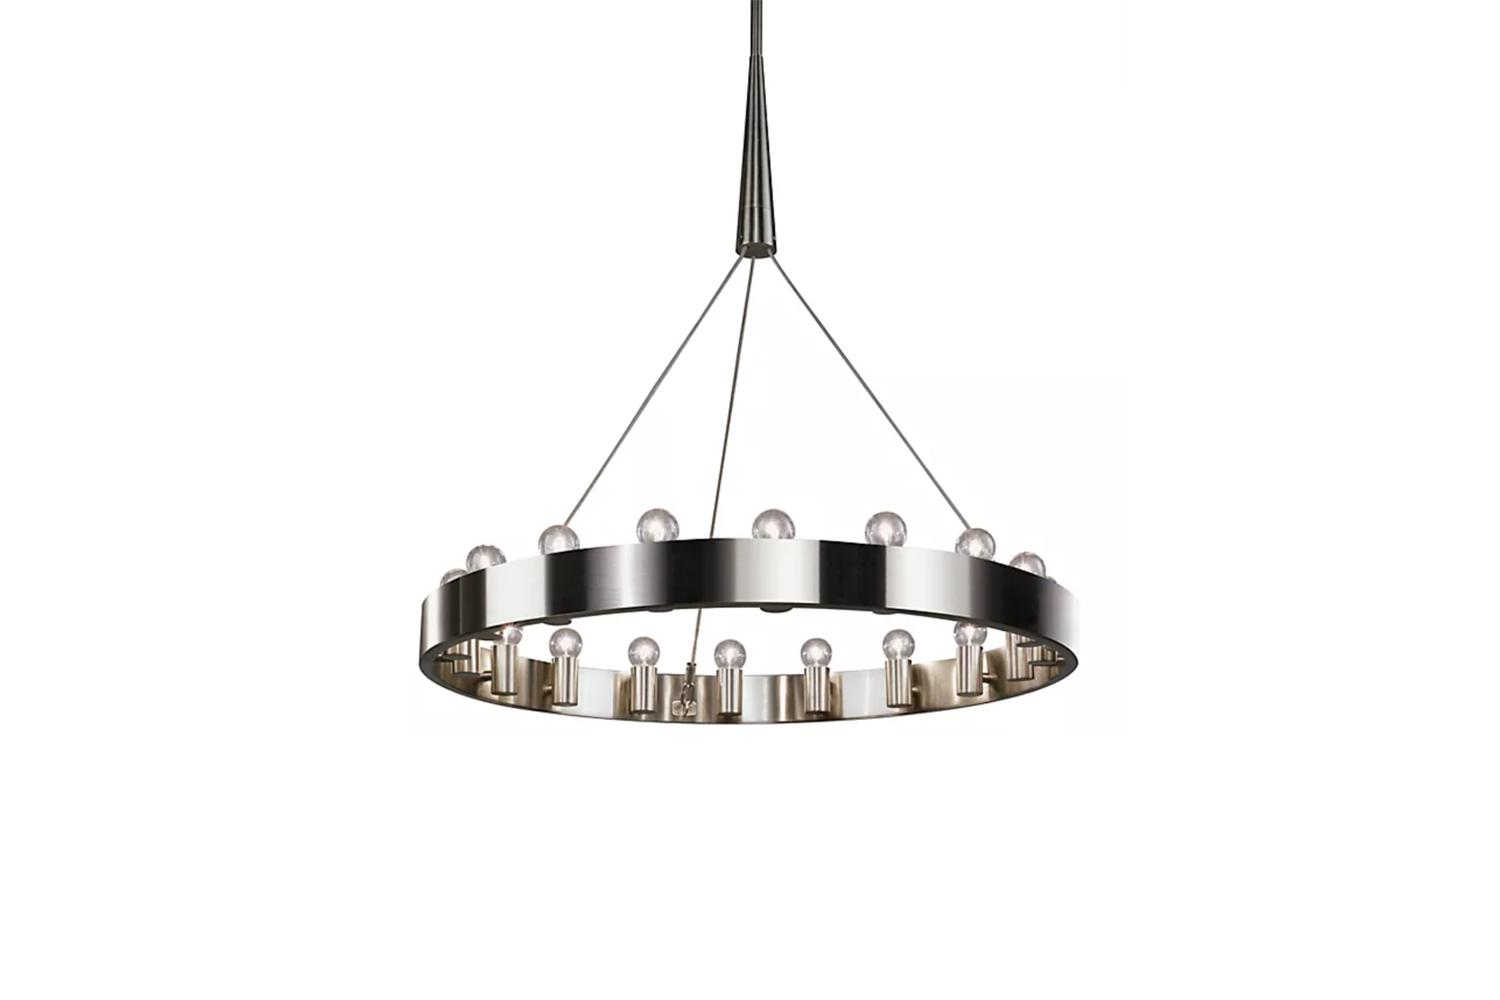 designed by rico espinet for robert abbey, the candelaria chandelier is $1,94 13